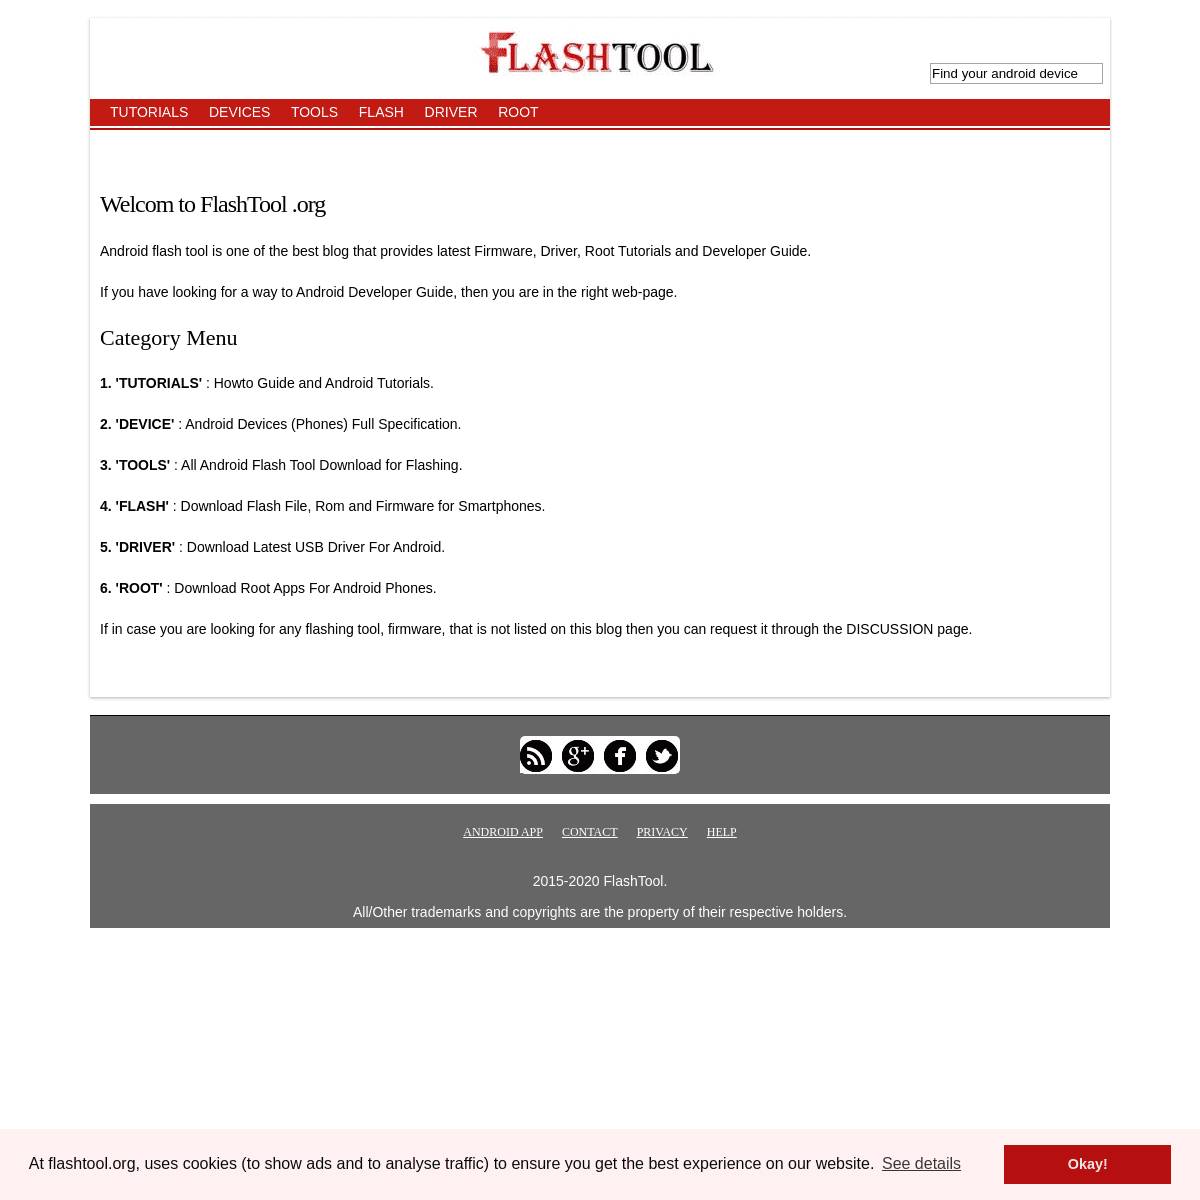 A complete backup of flashtool.org